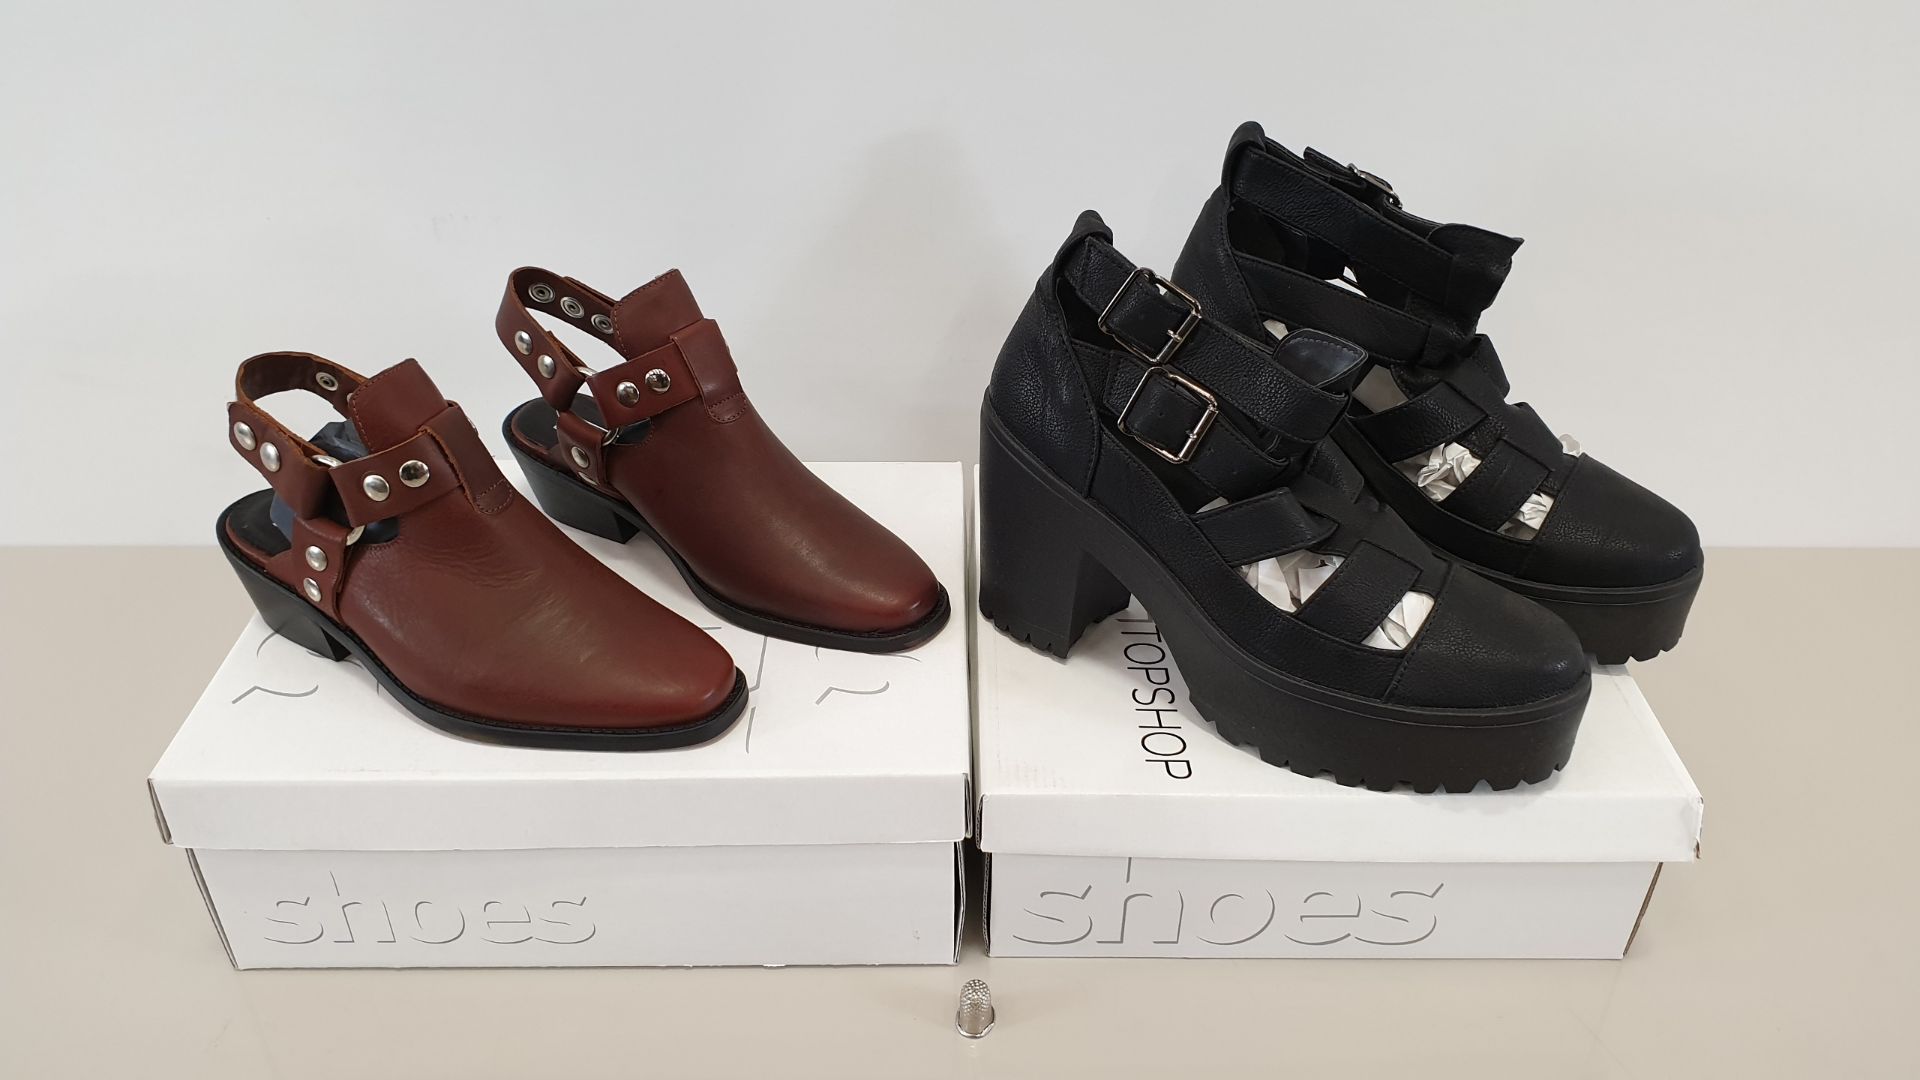 5 X TOPSHOP BOOTS IN VARIOUS STYLES SIZES AND COLOUR